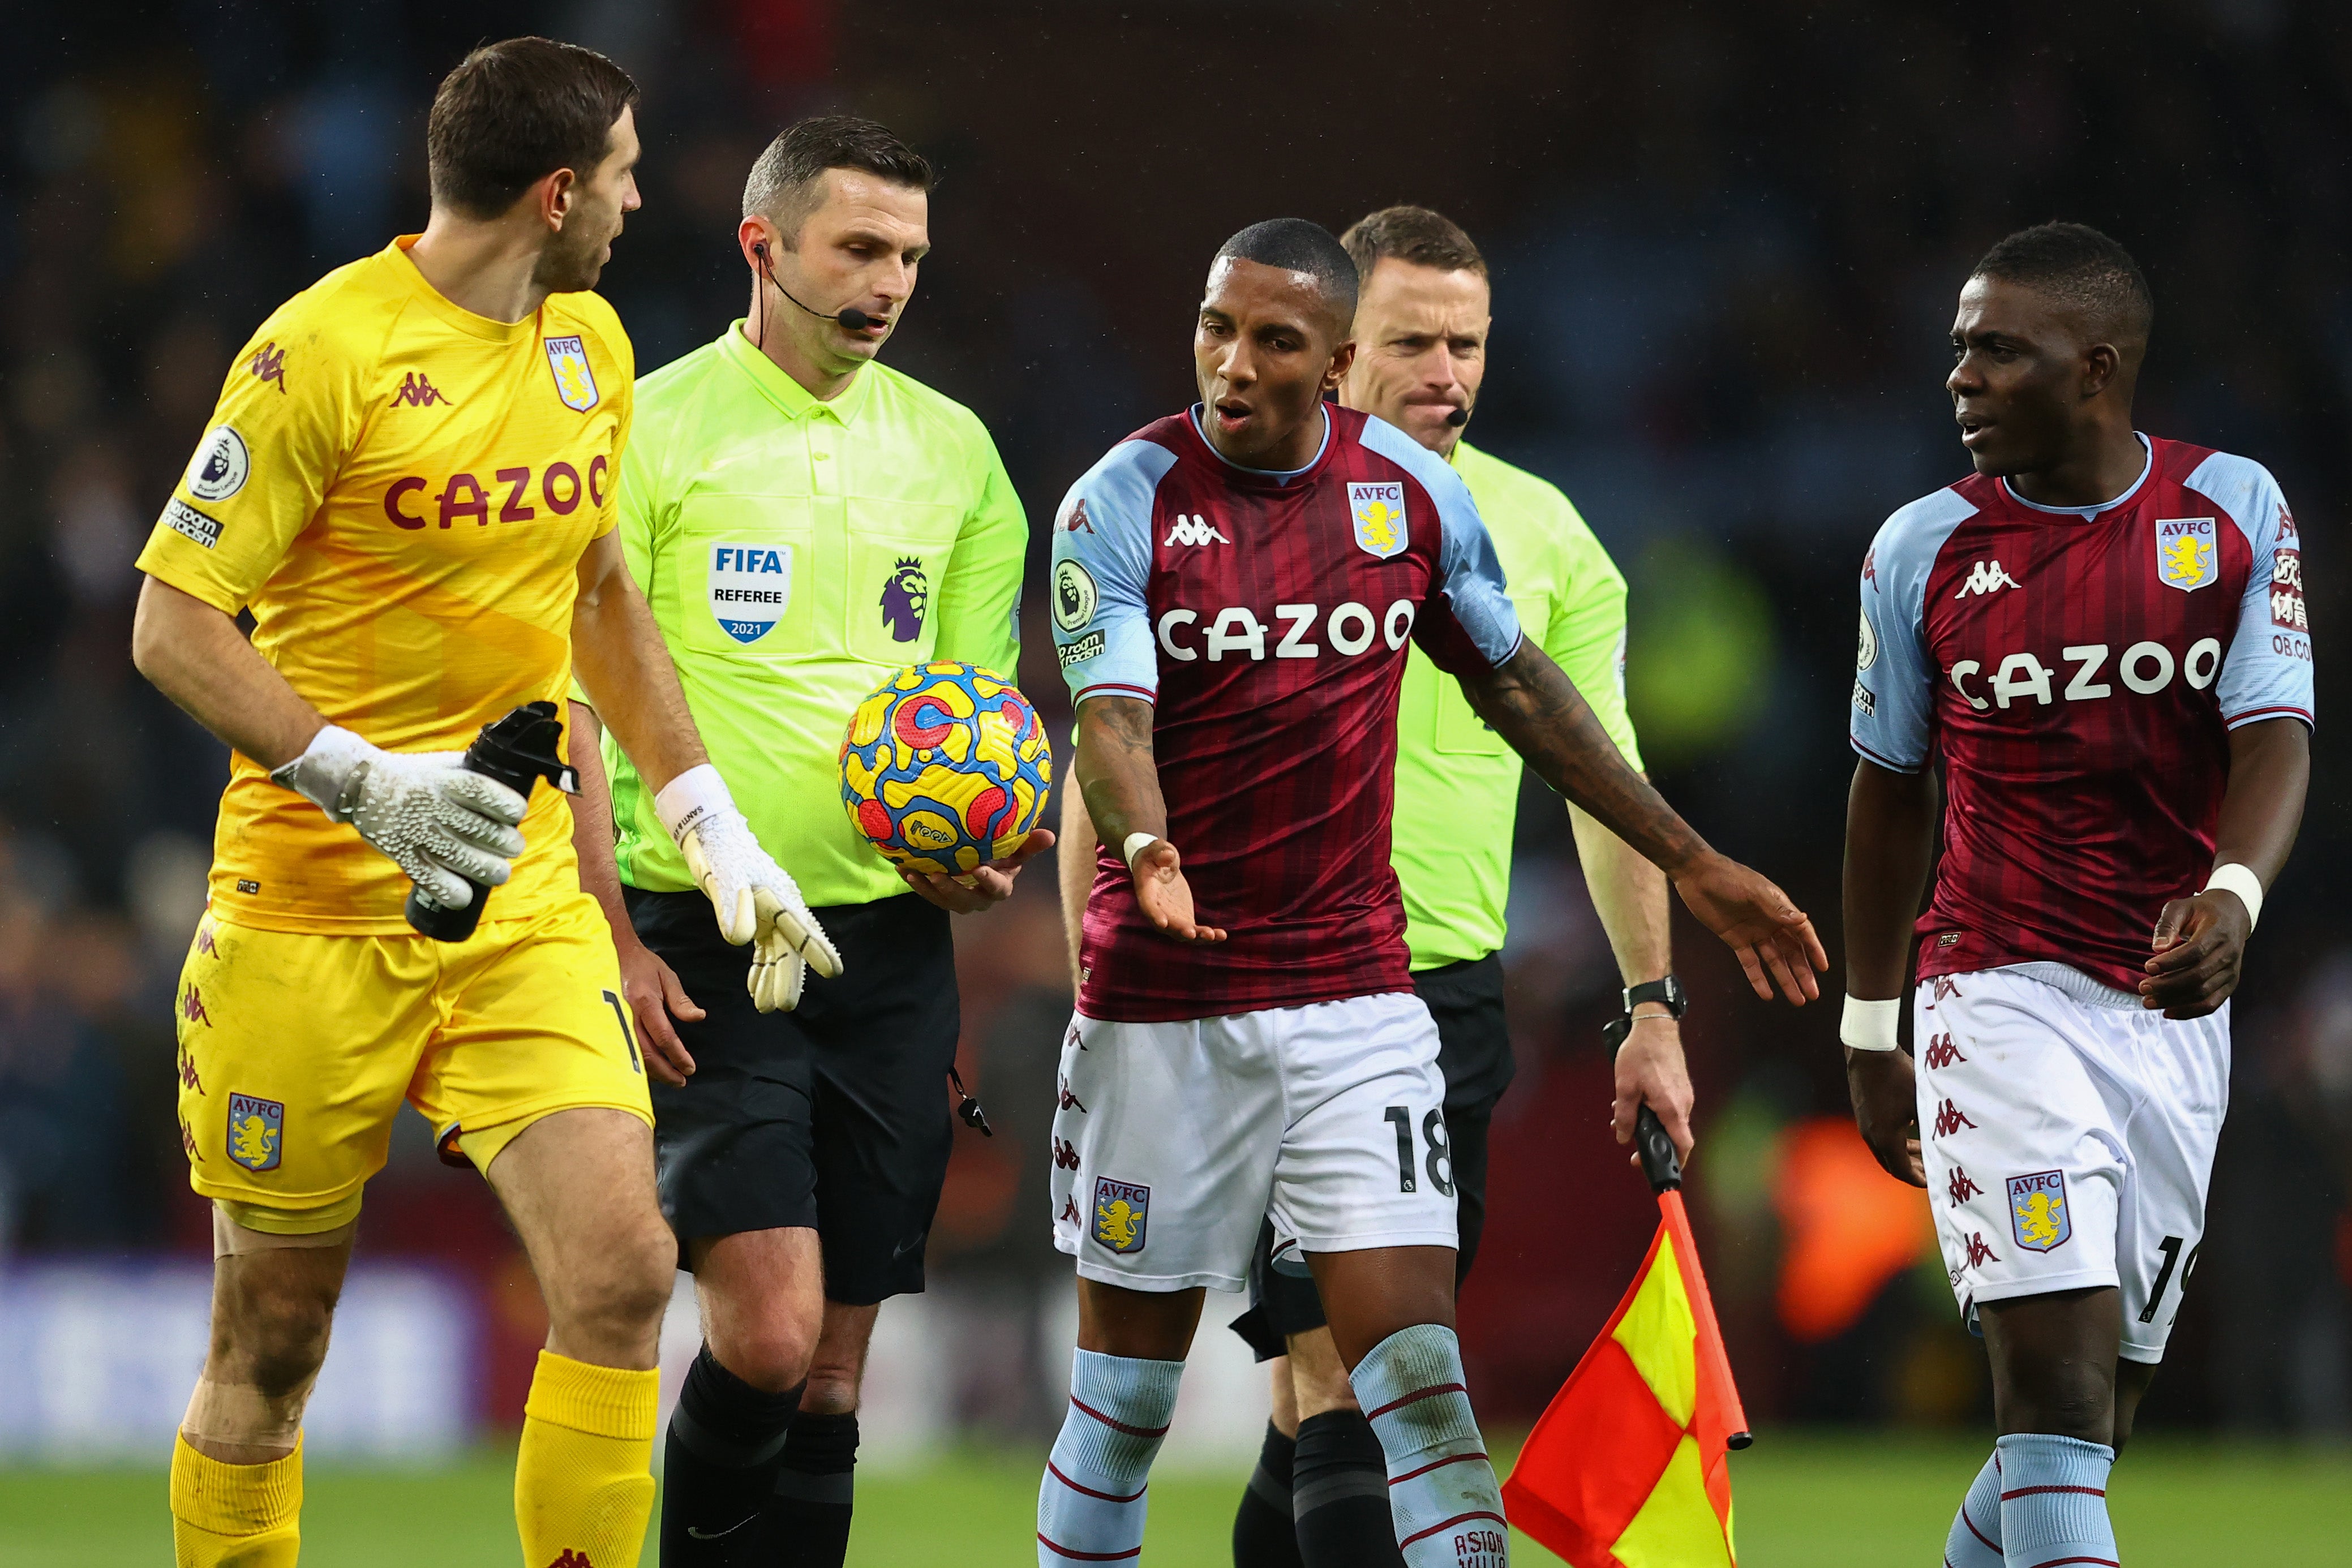 Aston Villa players remonstrate with referee Michael Oliver